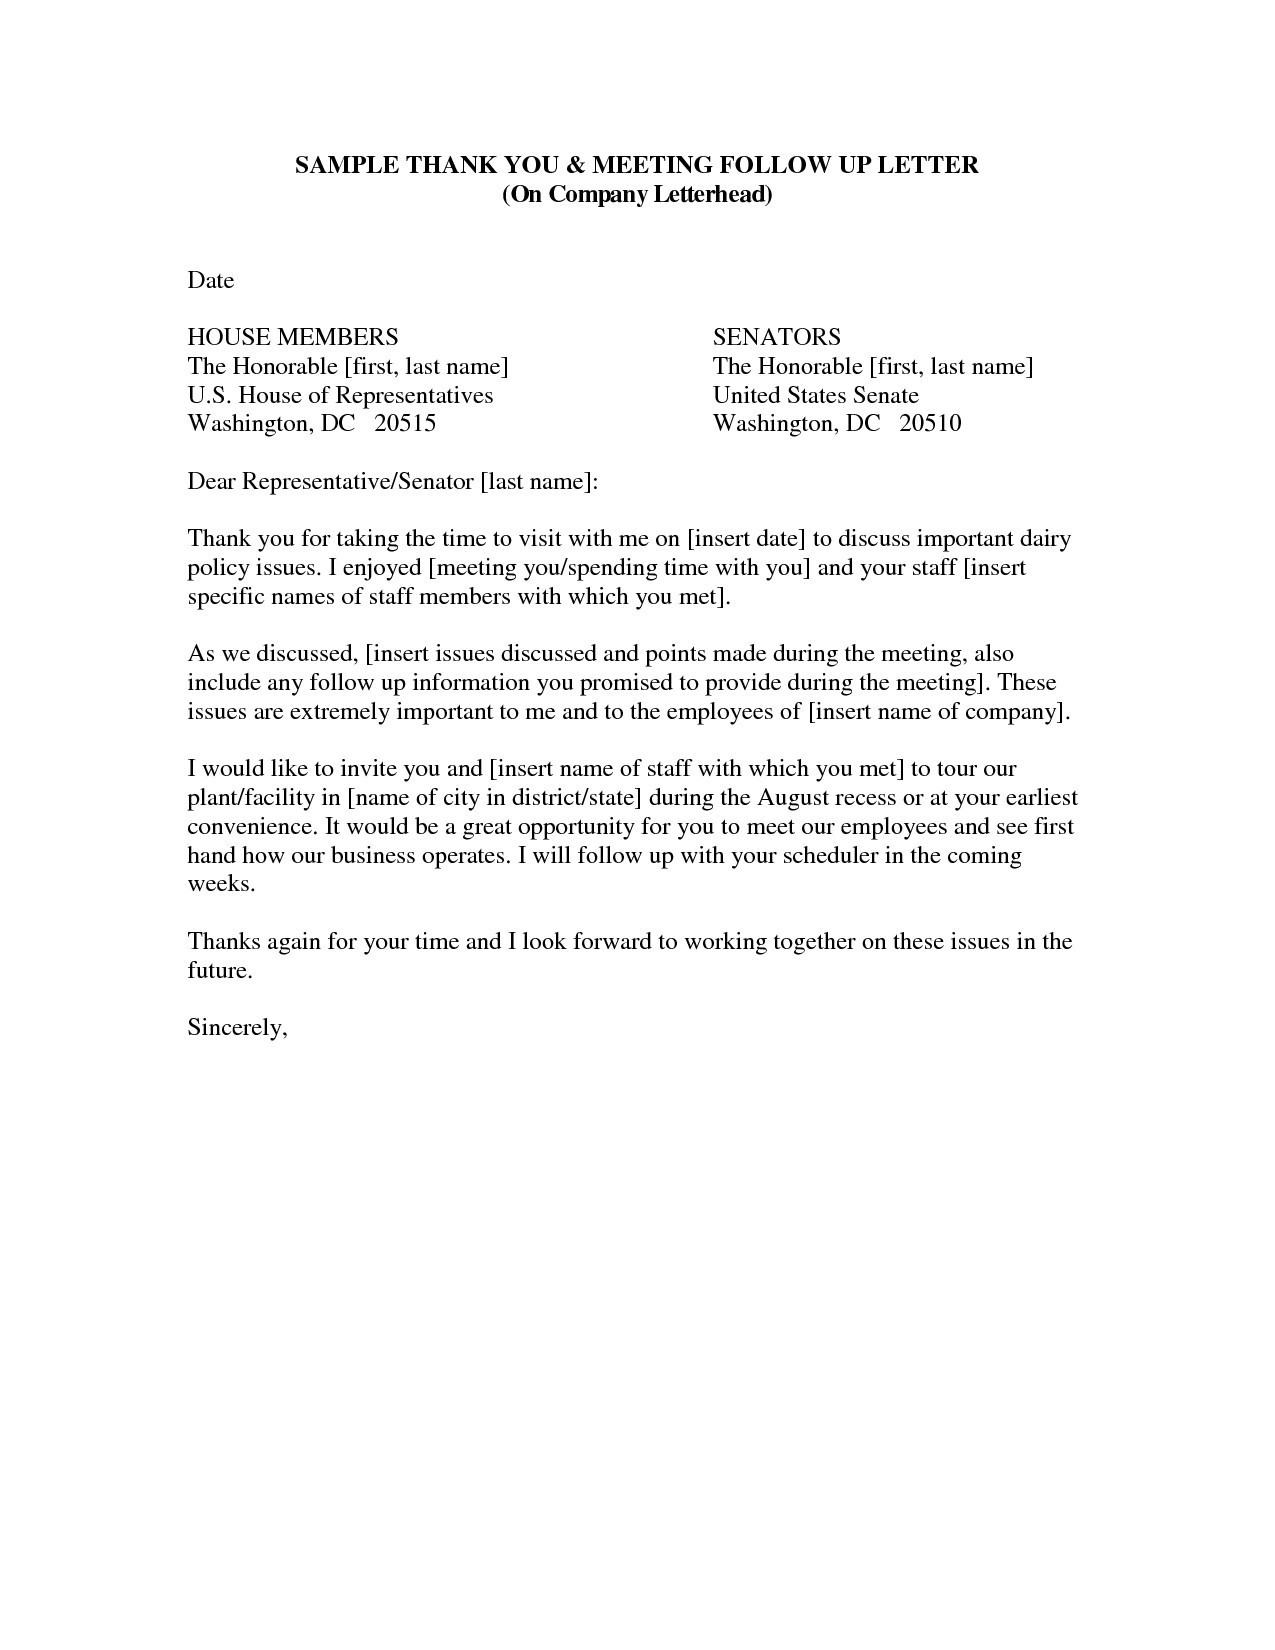 Sample Follow Up Thank You Letter After Business Meeting Archives Document